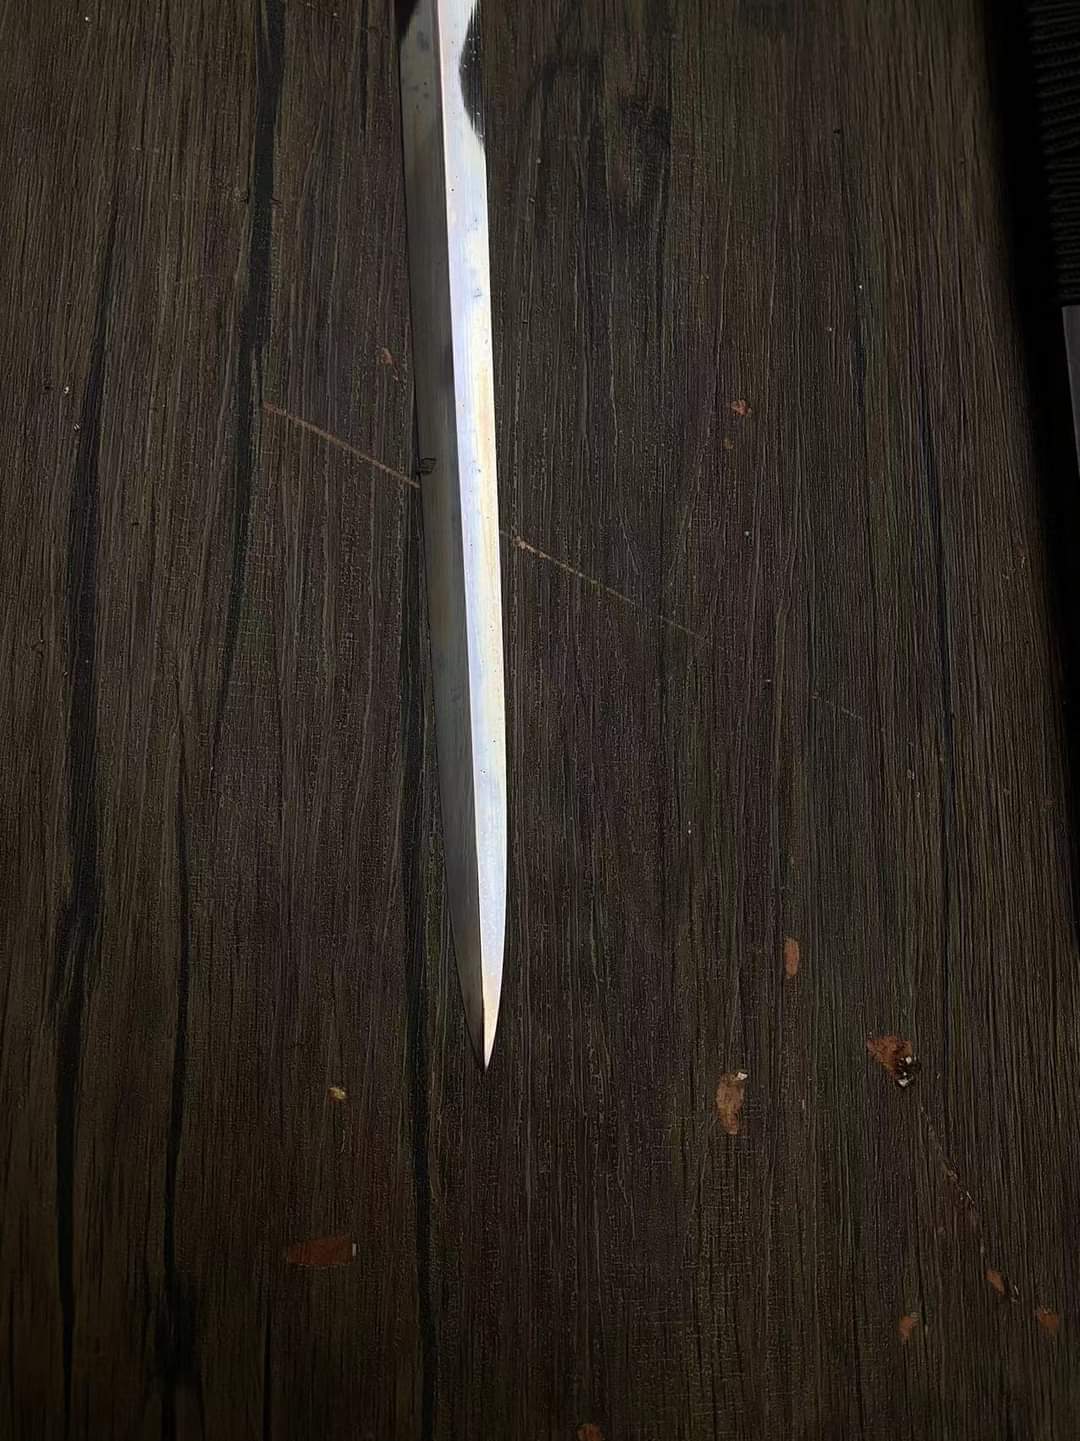 Jian - Two Handed Han Dynasty Style - s5, 4-sided blade